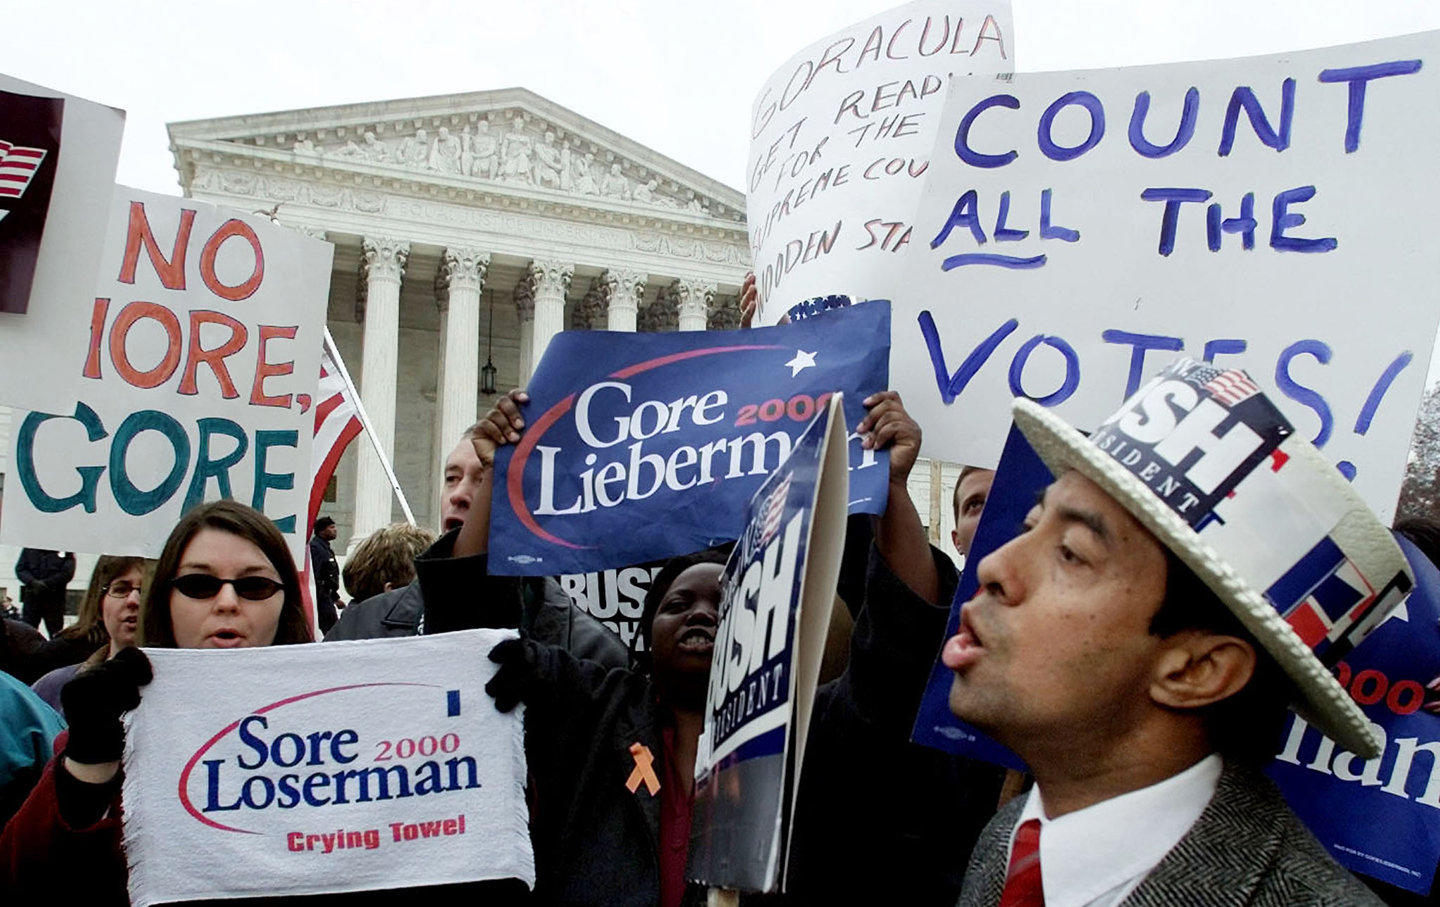 Bush v. Gore: Supporters face off in front of the Supreme Court, December 2000.